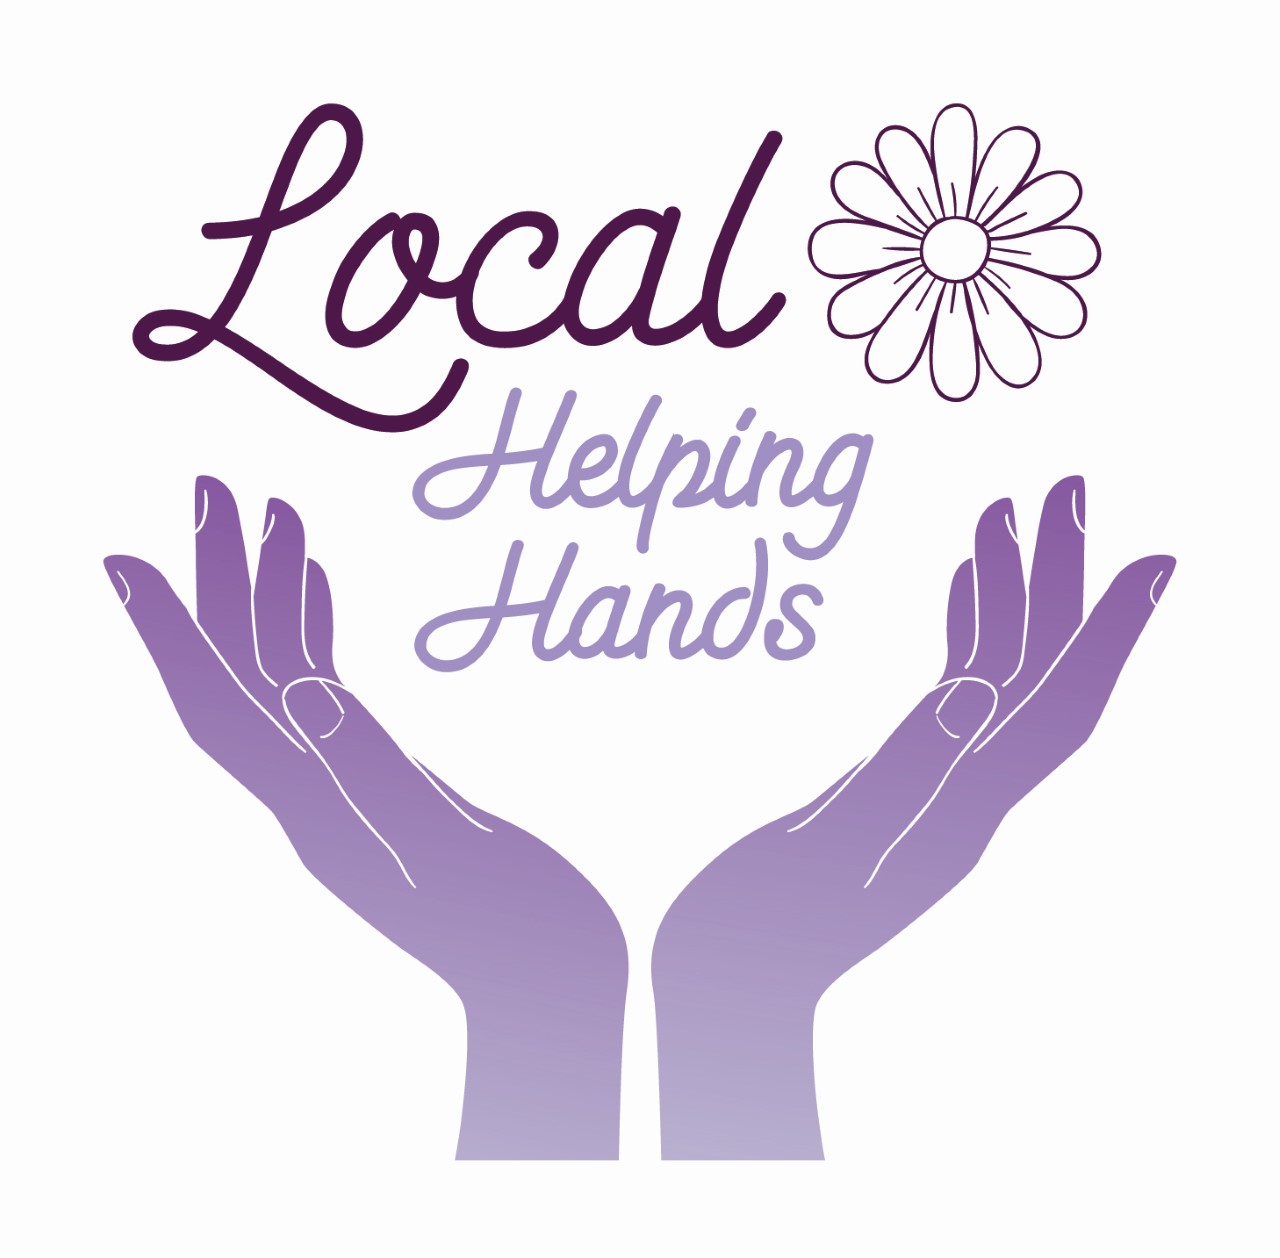 Local Helping Hands Limited